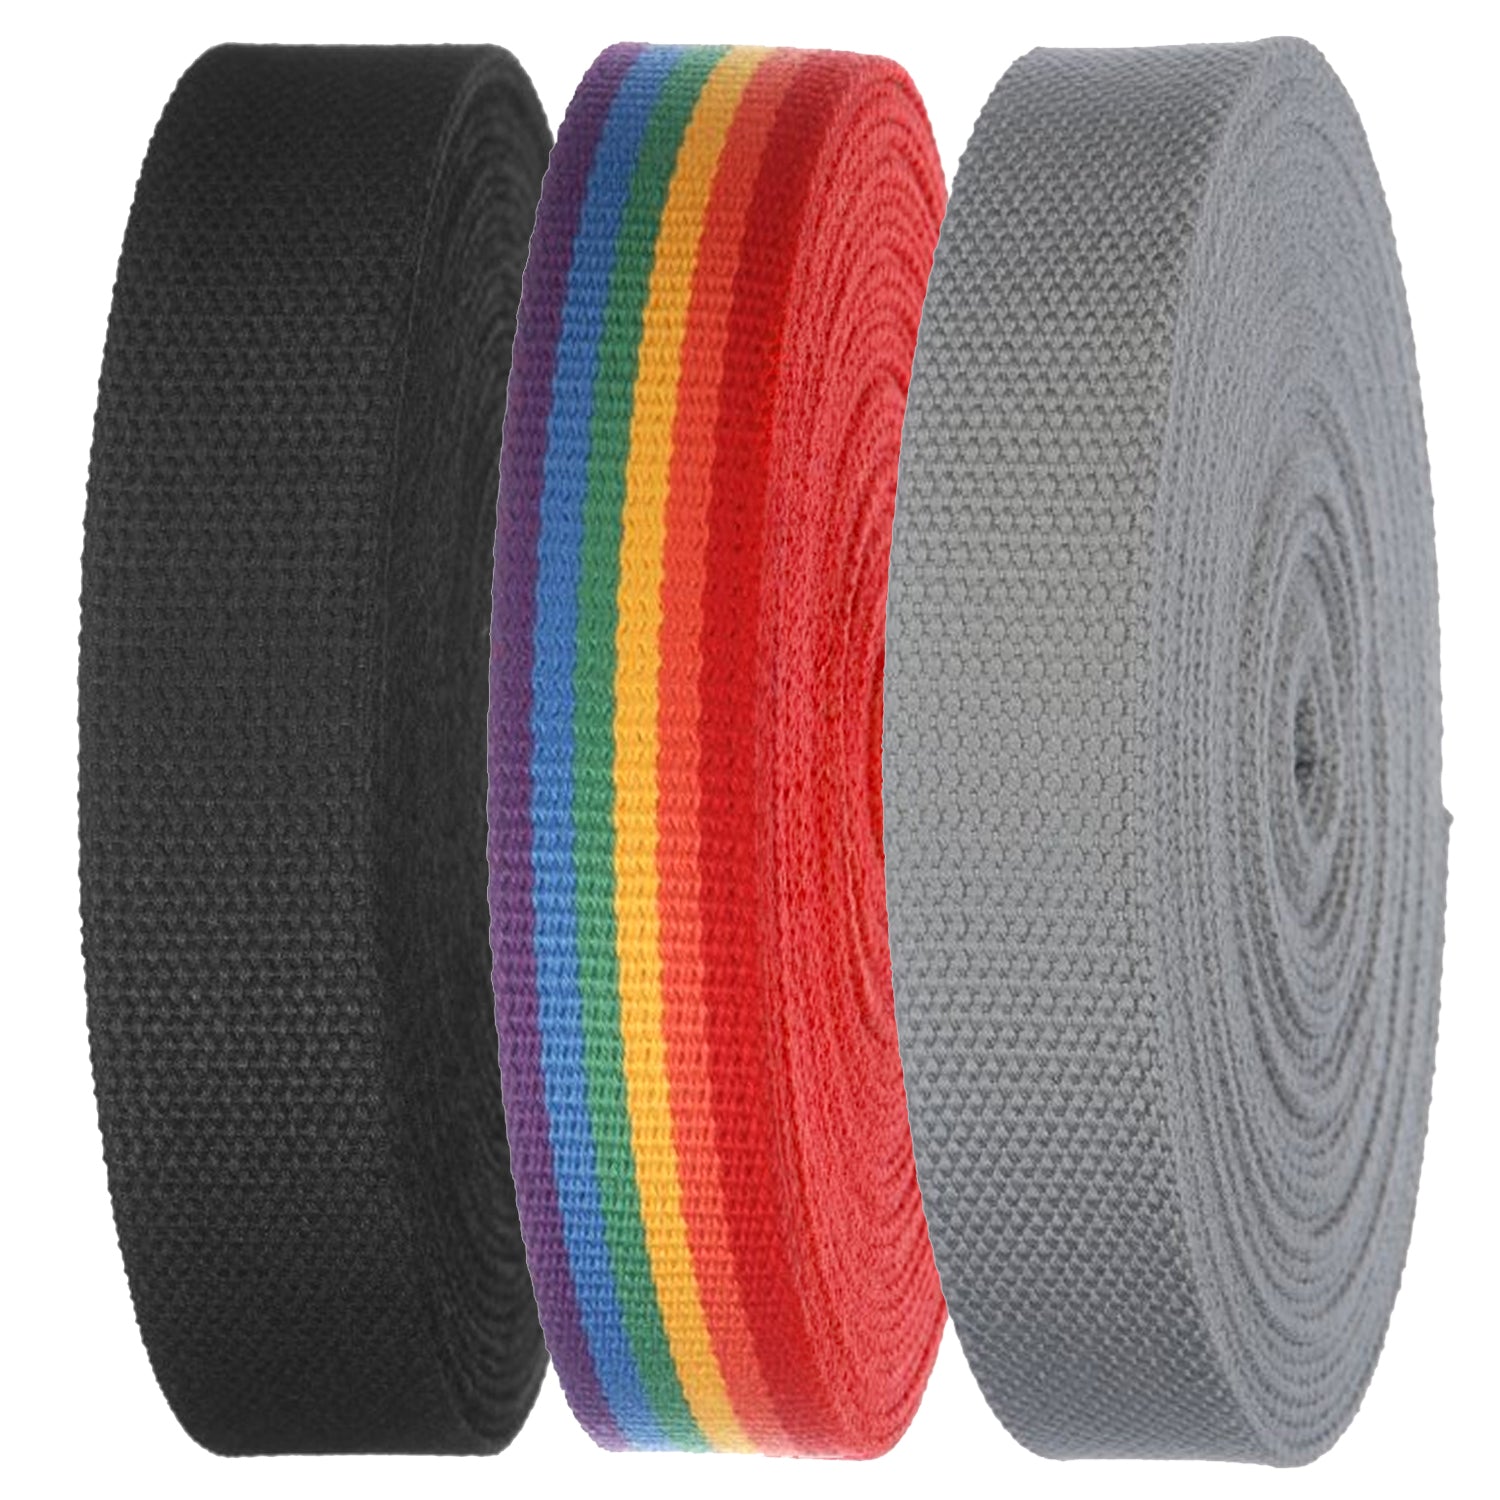 High Quality 1.5 Wide Canvas Webbing Roll Strap for Belts, Bags